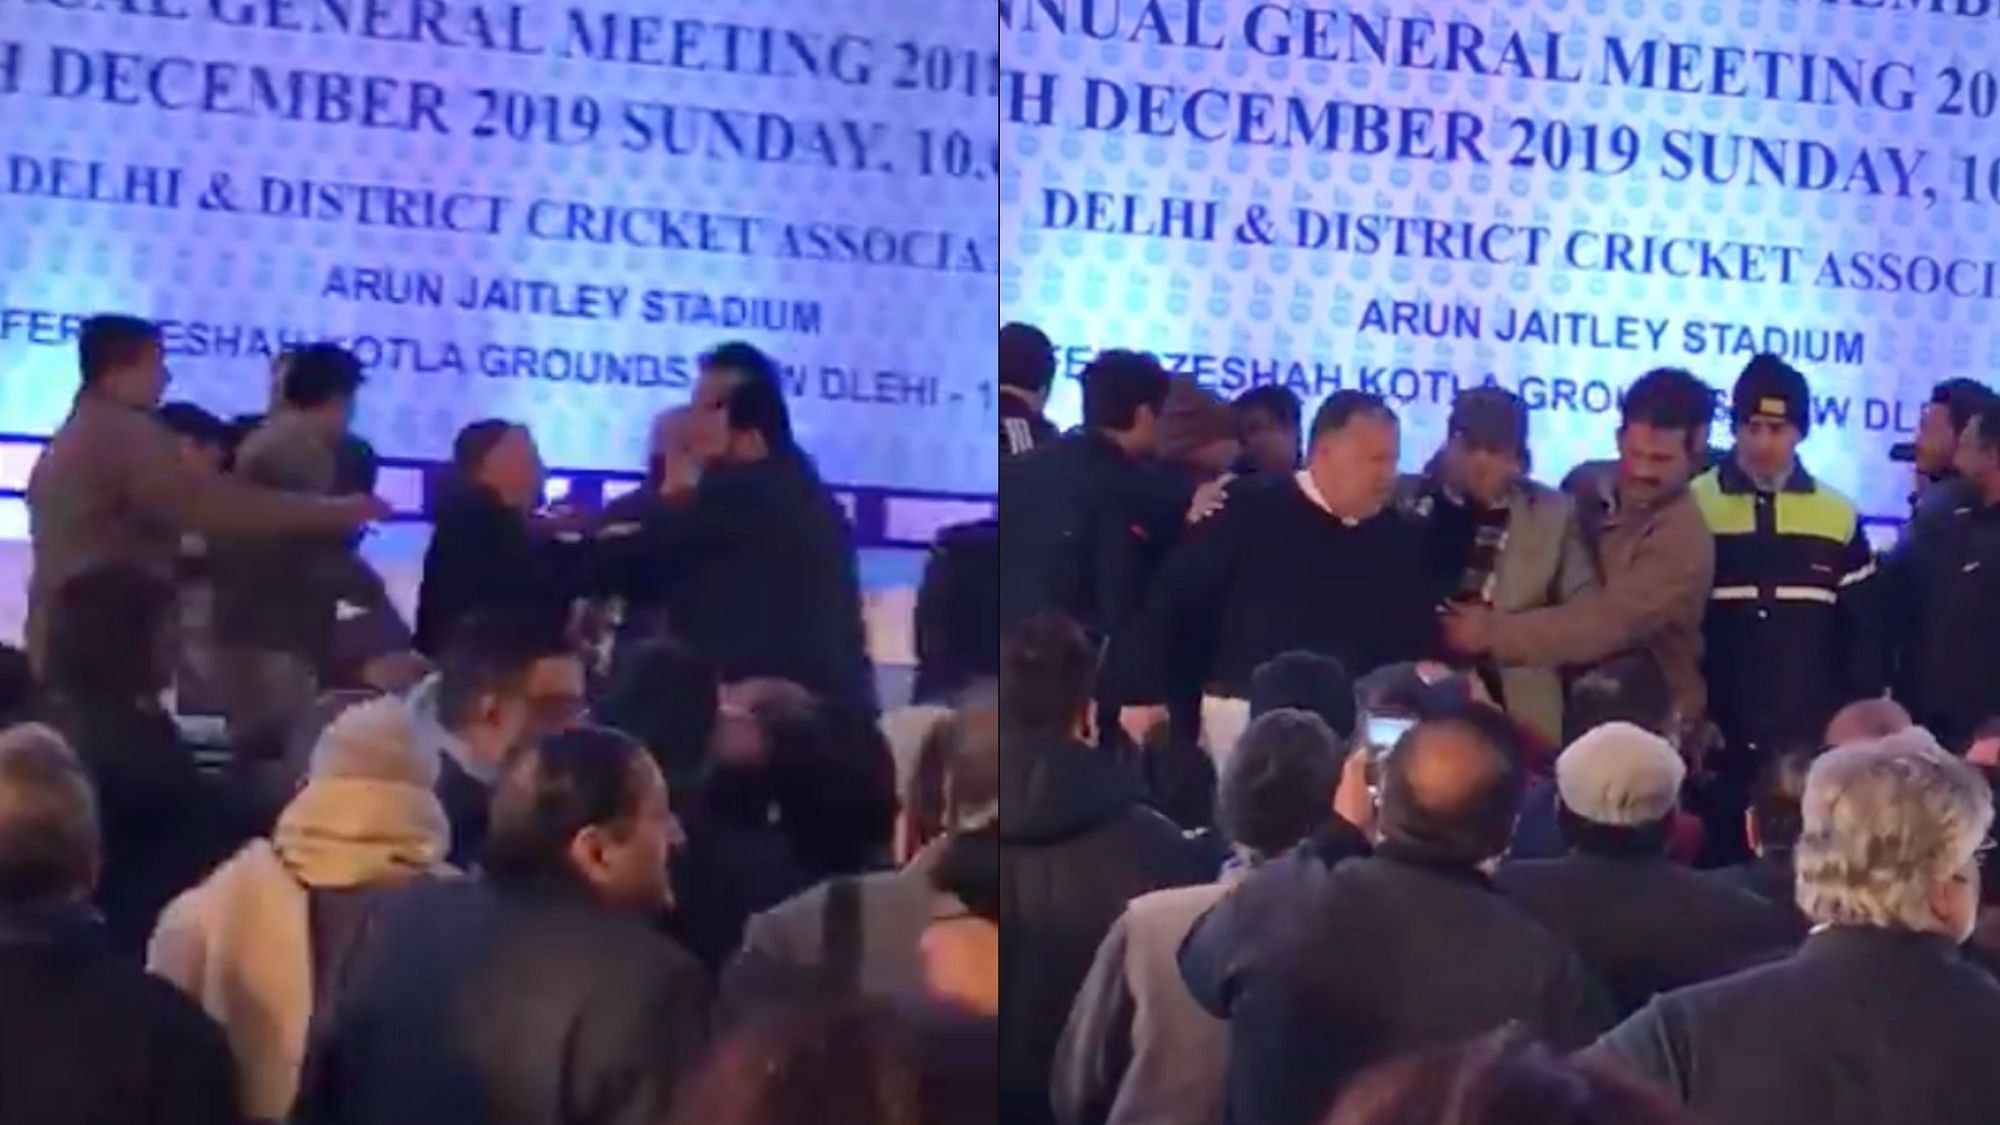 Members of the Delhi and District Cricket Associations (DDCA) on Sunday, 29 December were involved in a serious fist fight during its Annual General Meeting (AGM).